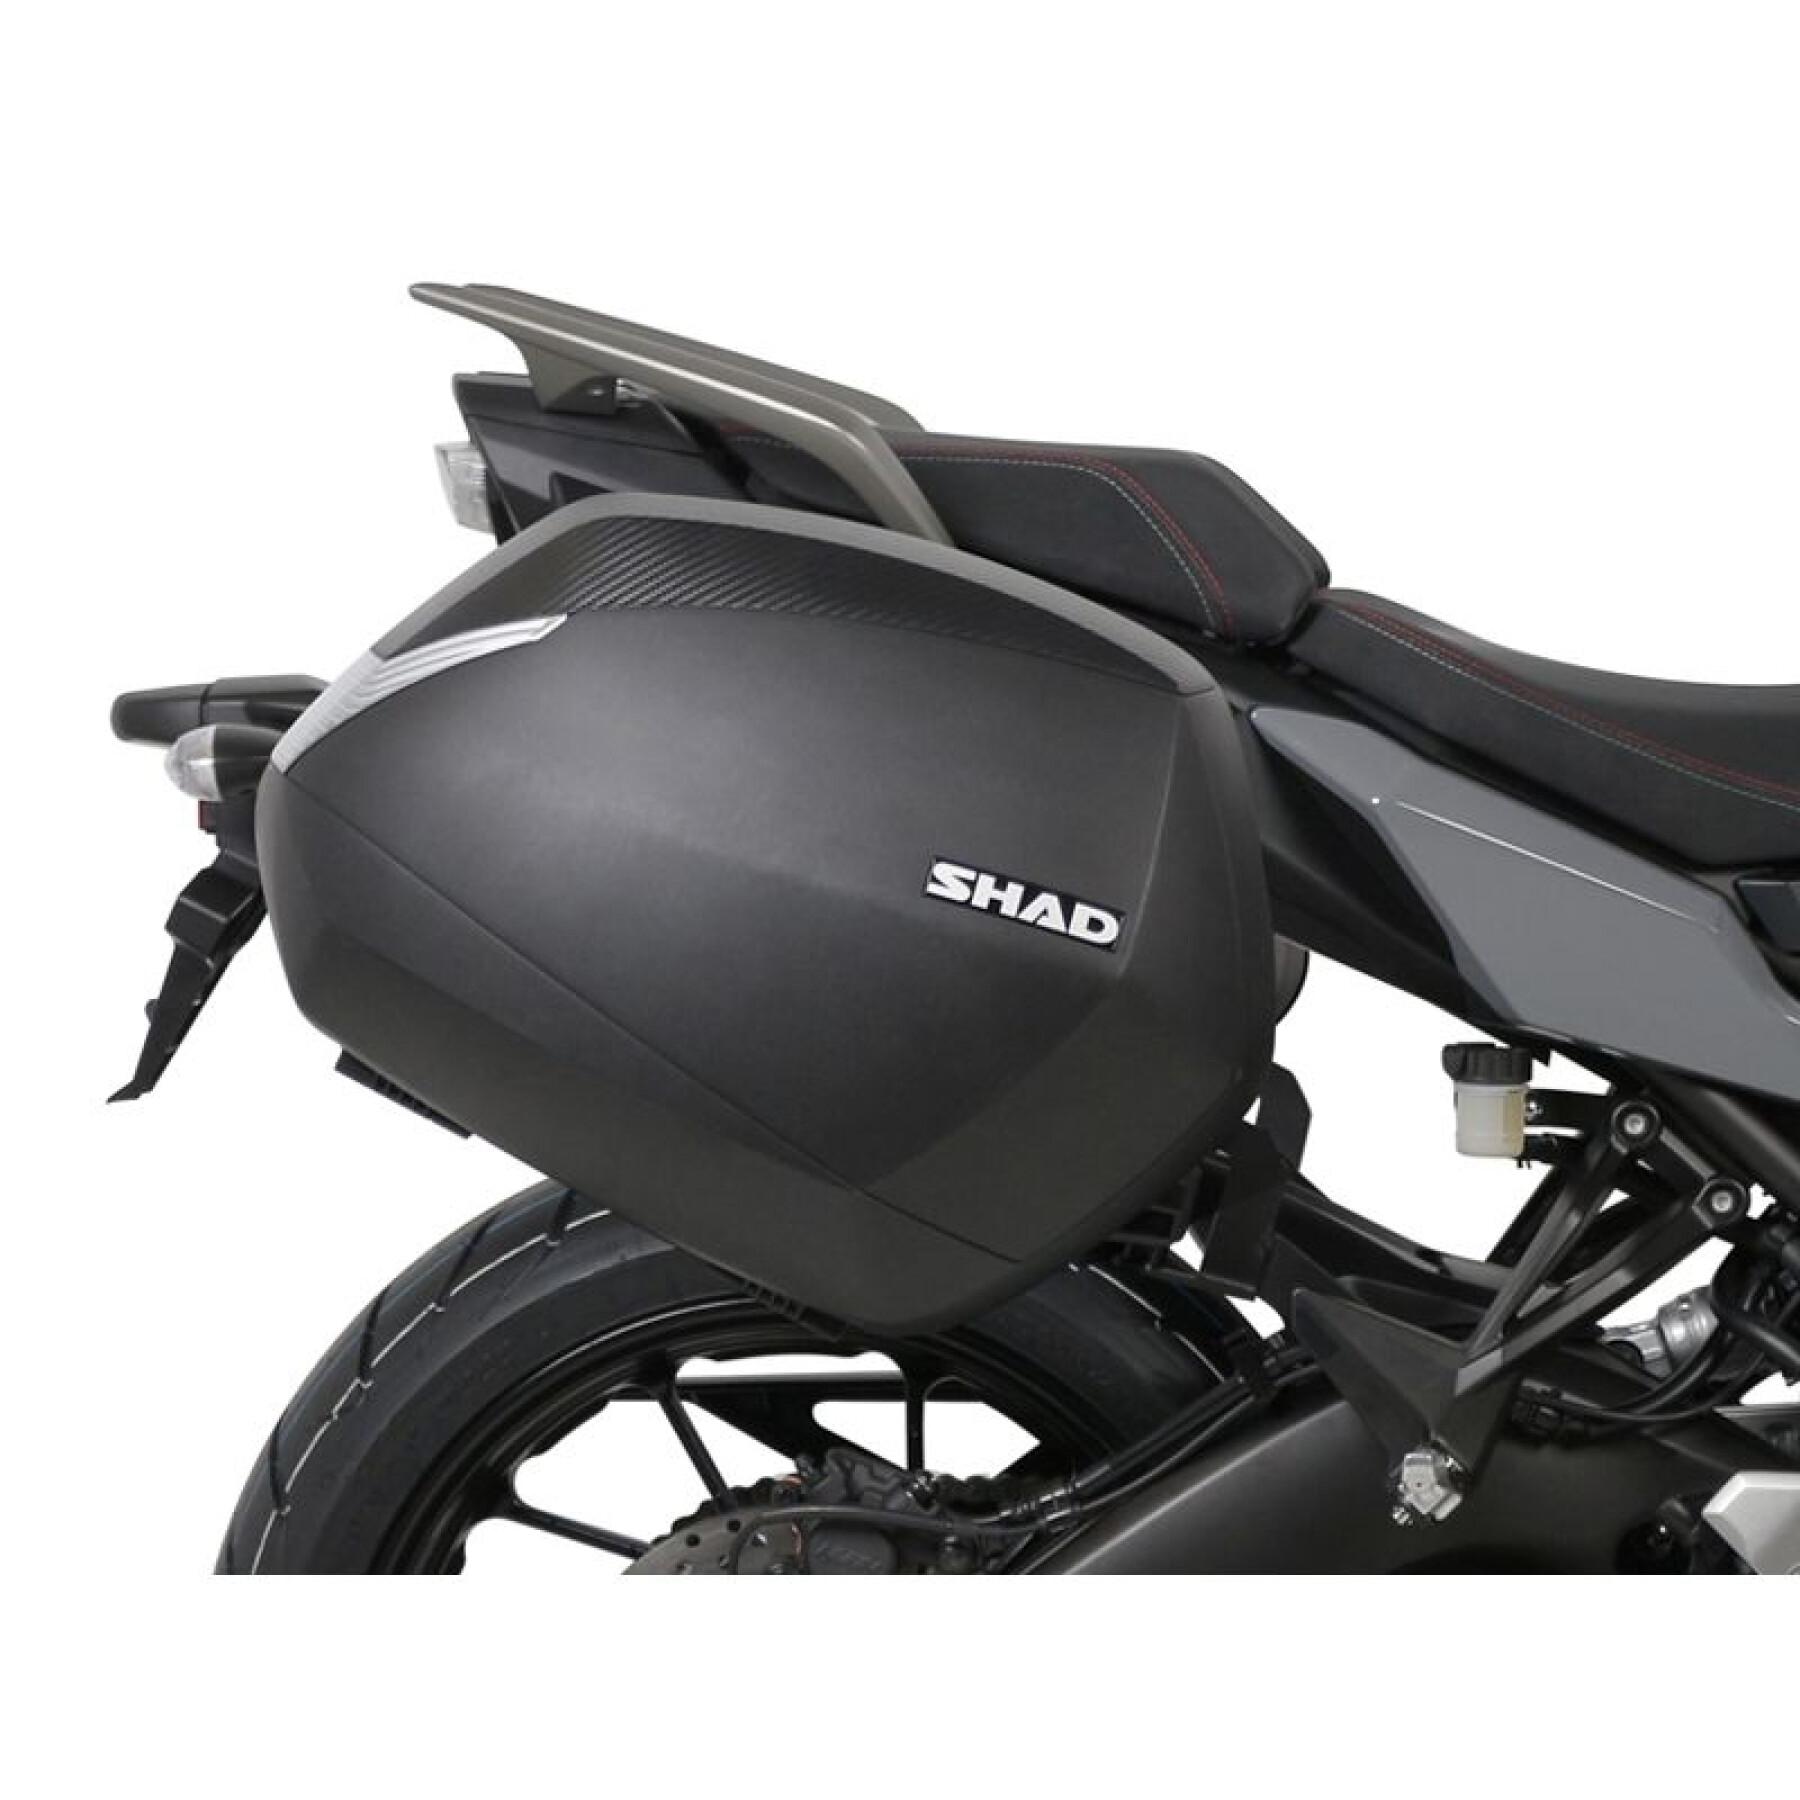 Support valises latérales moto Shad 3P System Yamaha Tracer 900 / Gt (18 À 20)